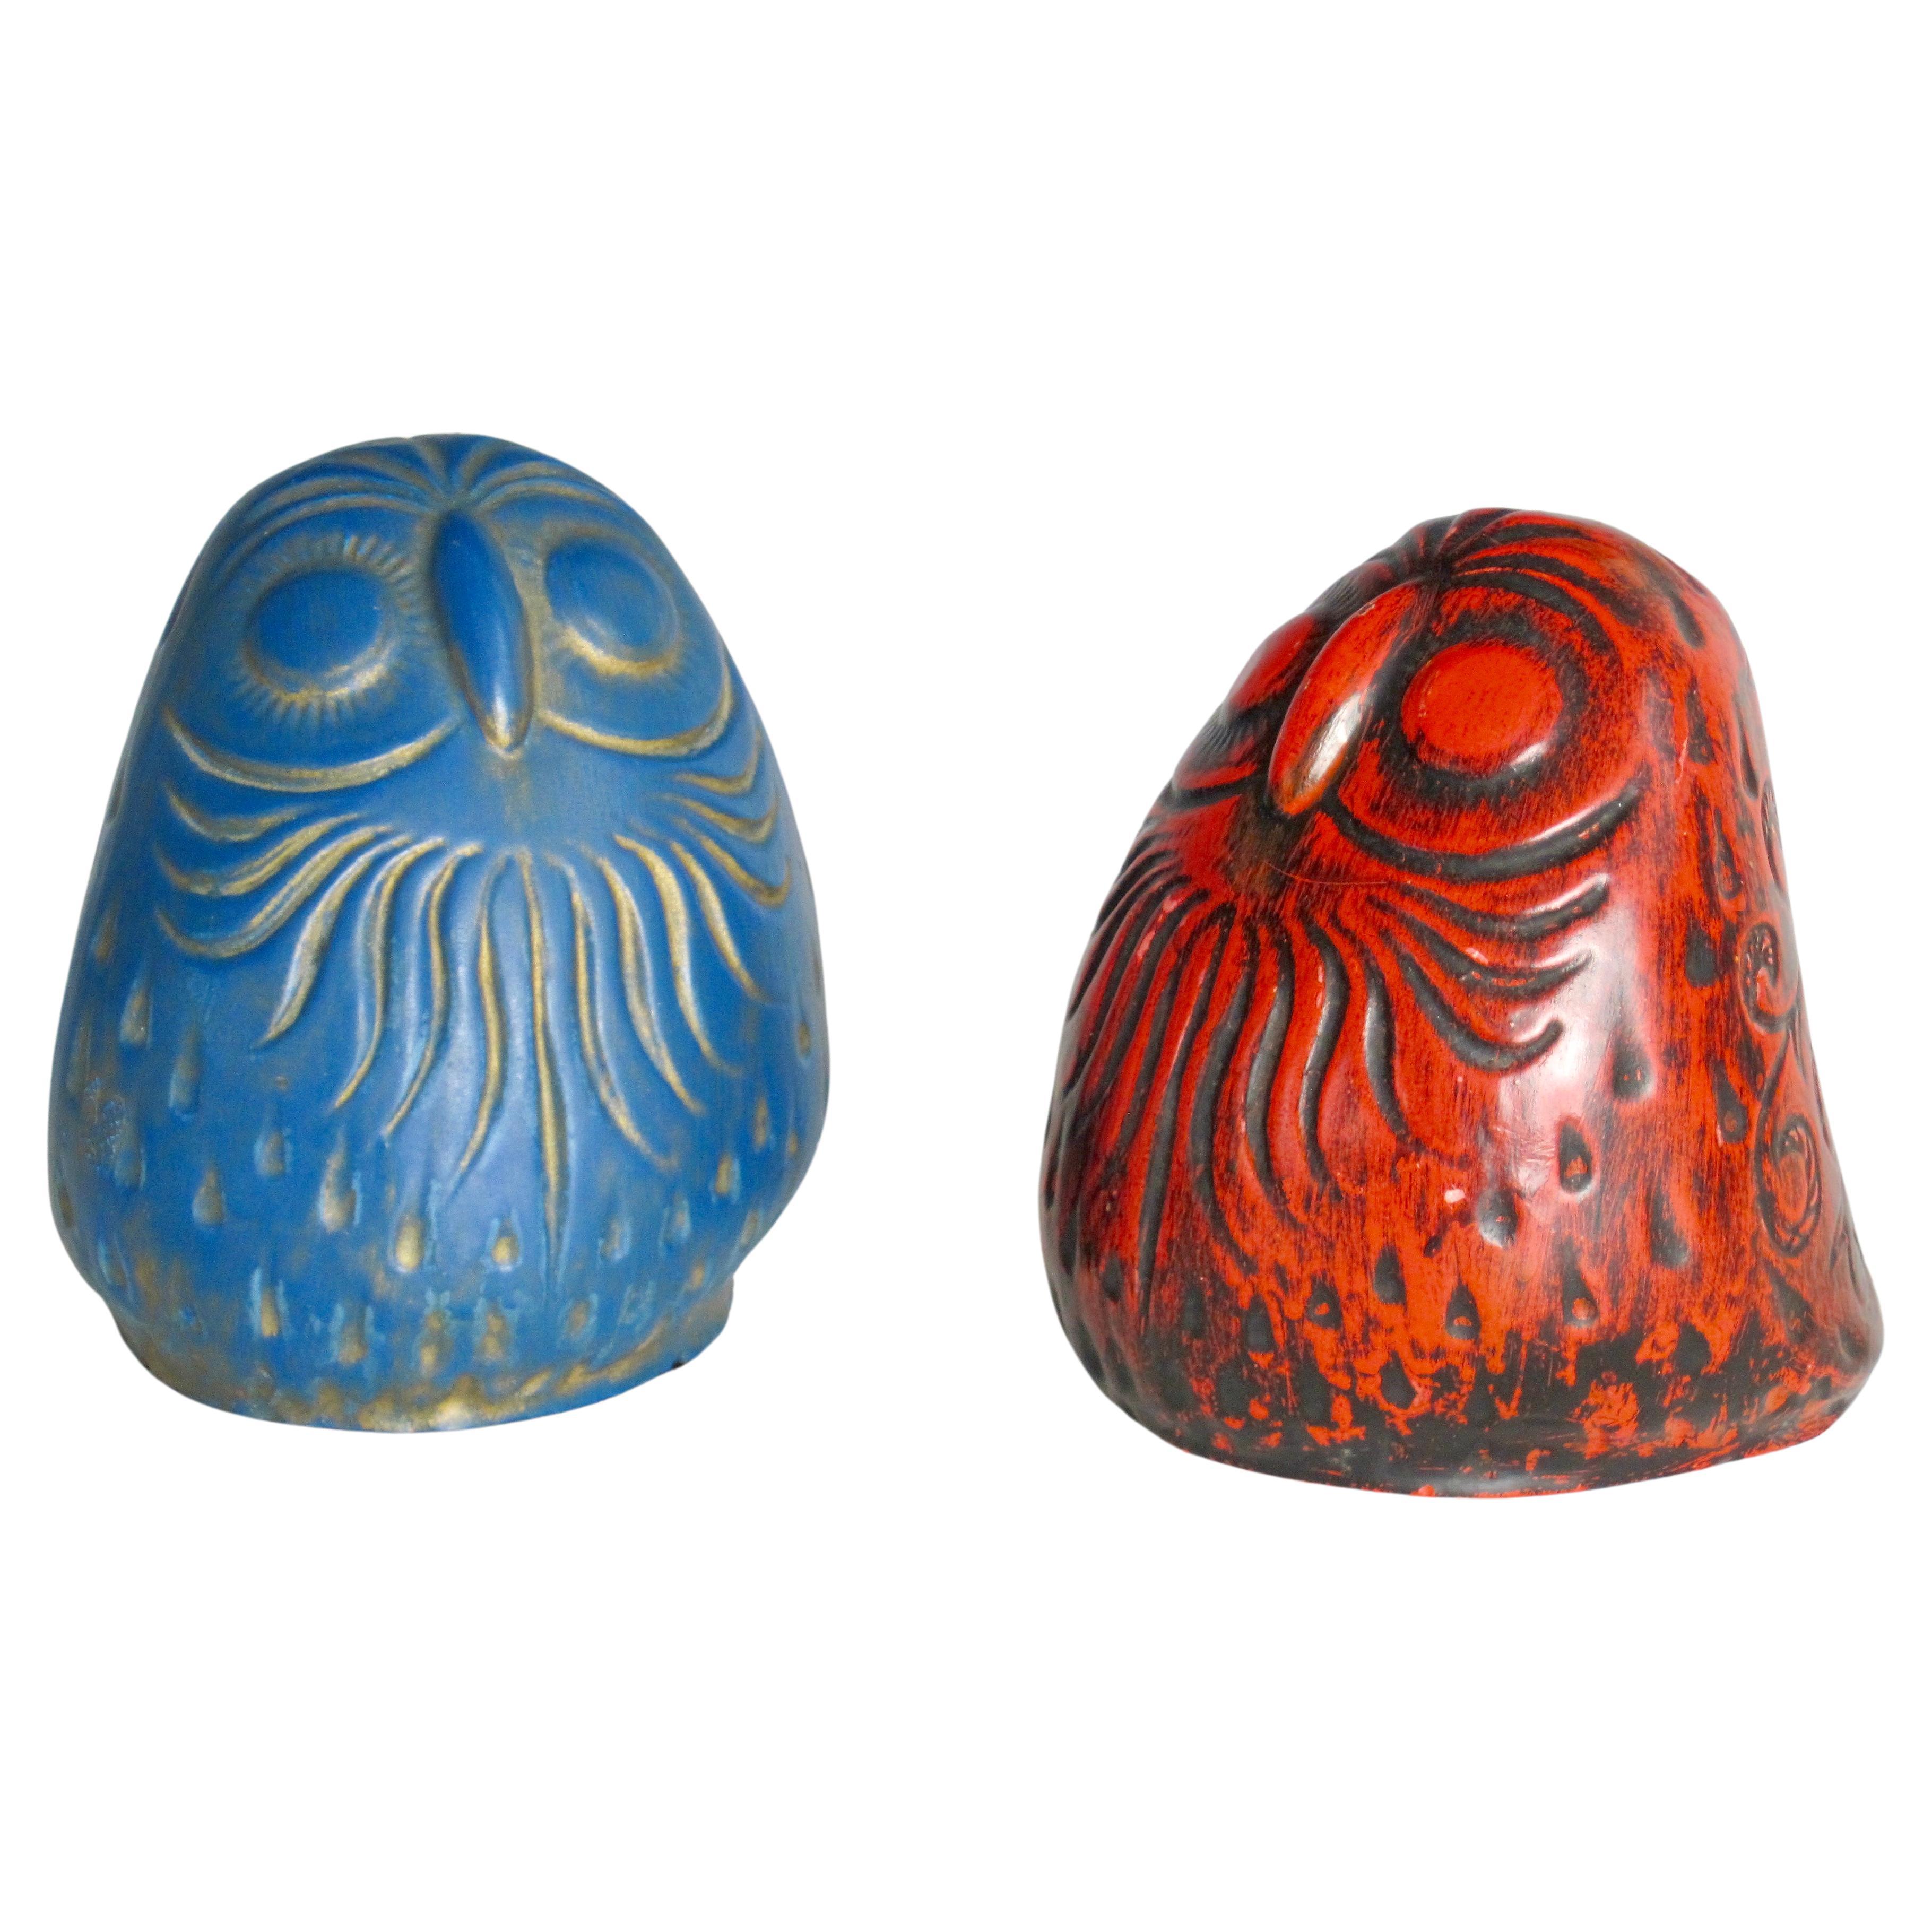 1970s Red and Blue Owl Sculpture Pair